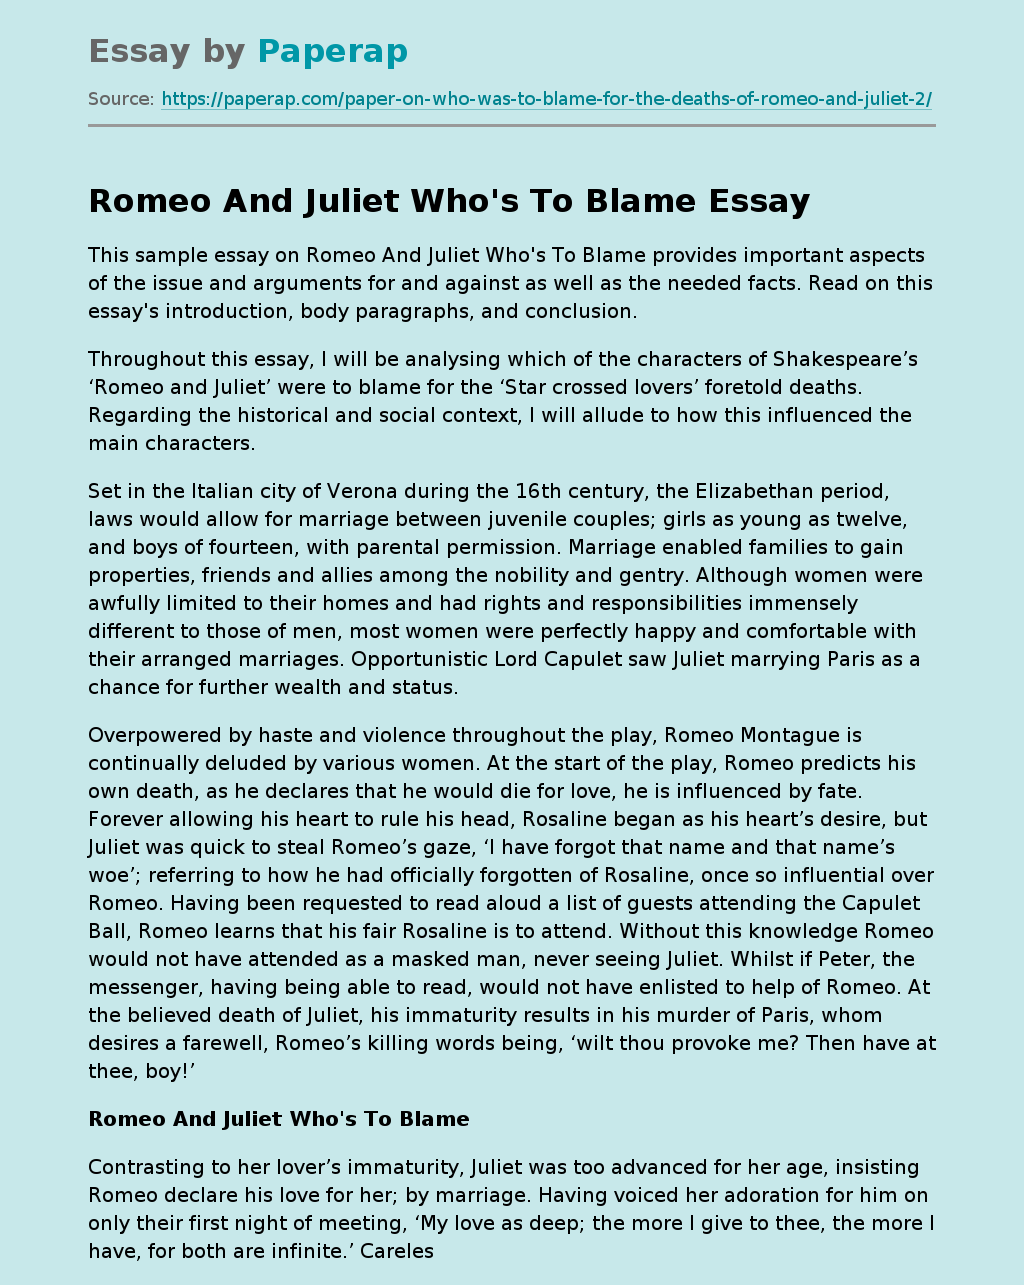 essay for romeo and juliet who's to blame